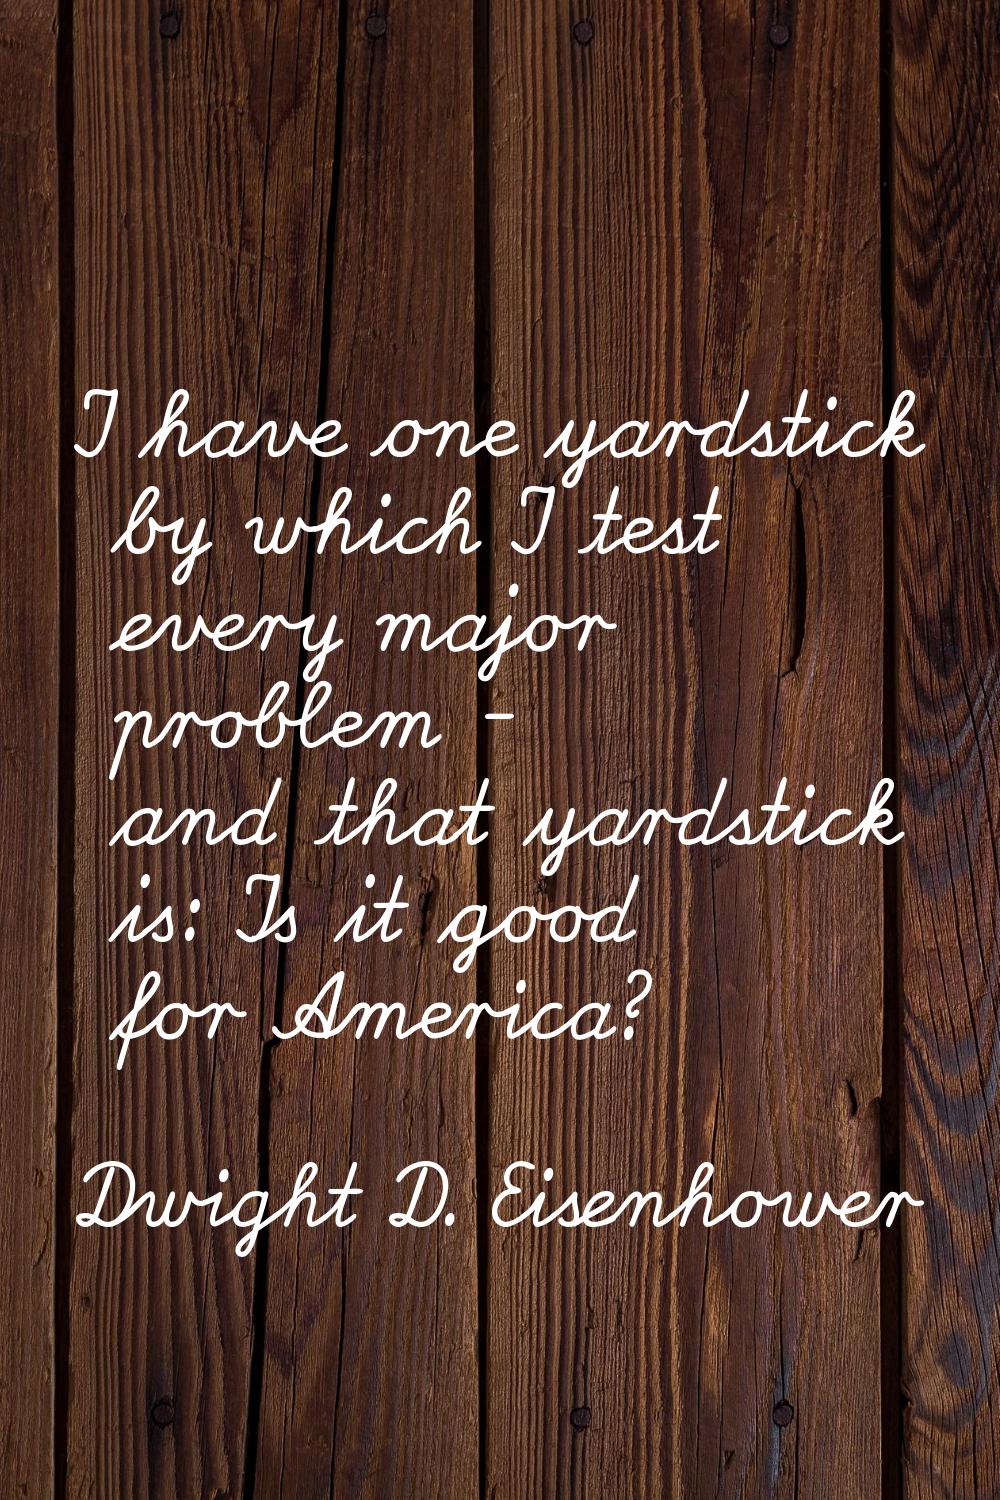 I have one yardstick by which I test every major problem - and that yardstick is: Is it good for Am